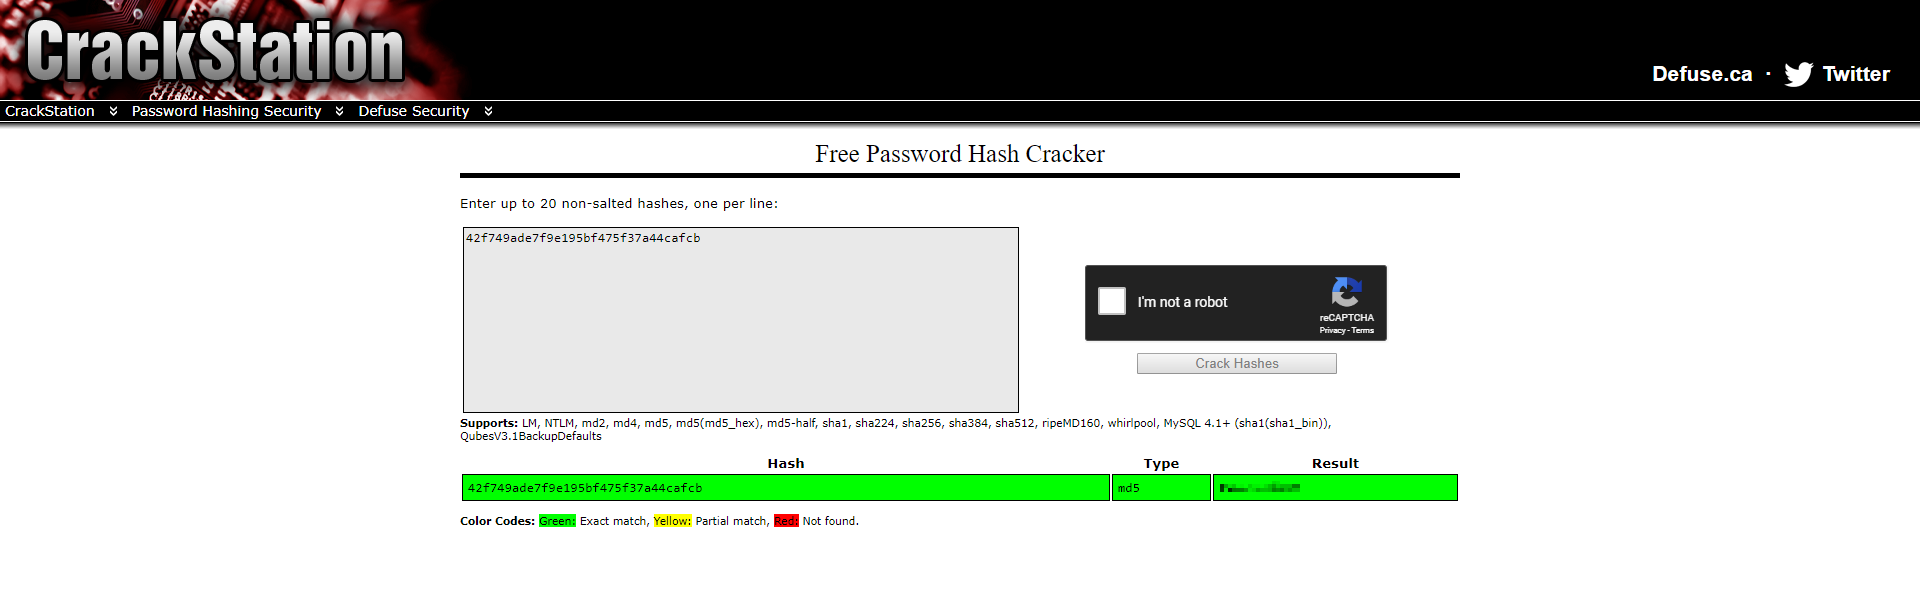 Screenshot from Crackstation showing the cracked password